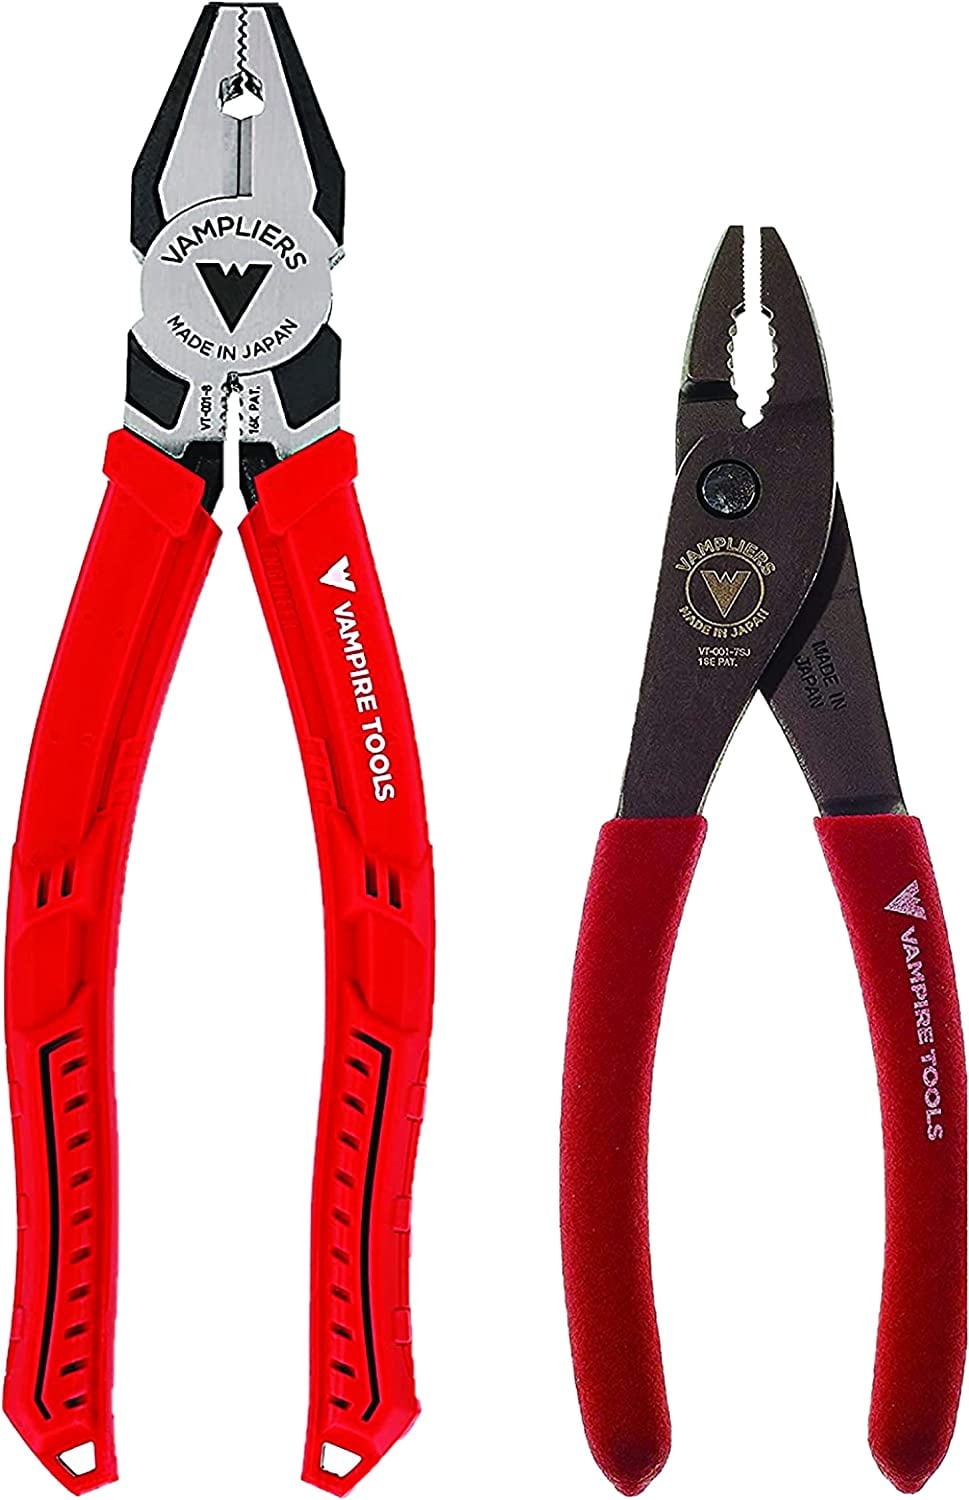 VAMPLIERS 2-pc Screw Extractor Set: 8in. PRO Lineman's Pliers + 7in. Slip-Joint Pliers, Stripped Screw Removal Tools - VT-001-S2C